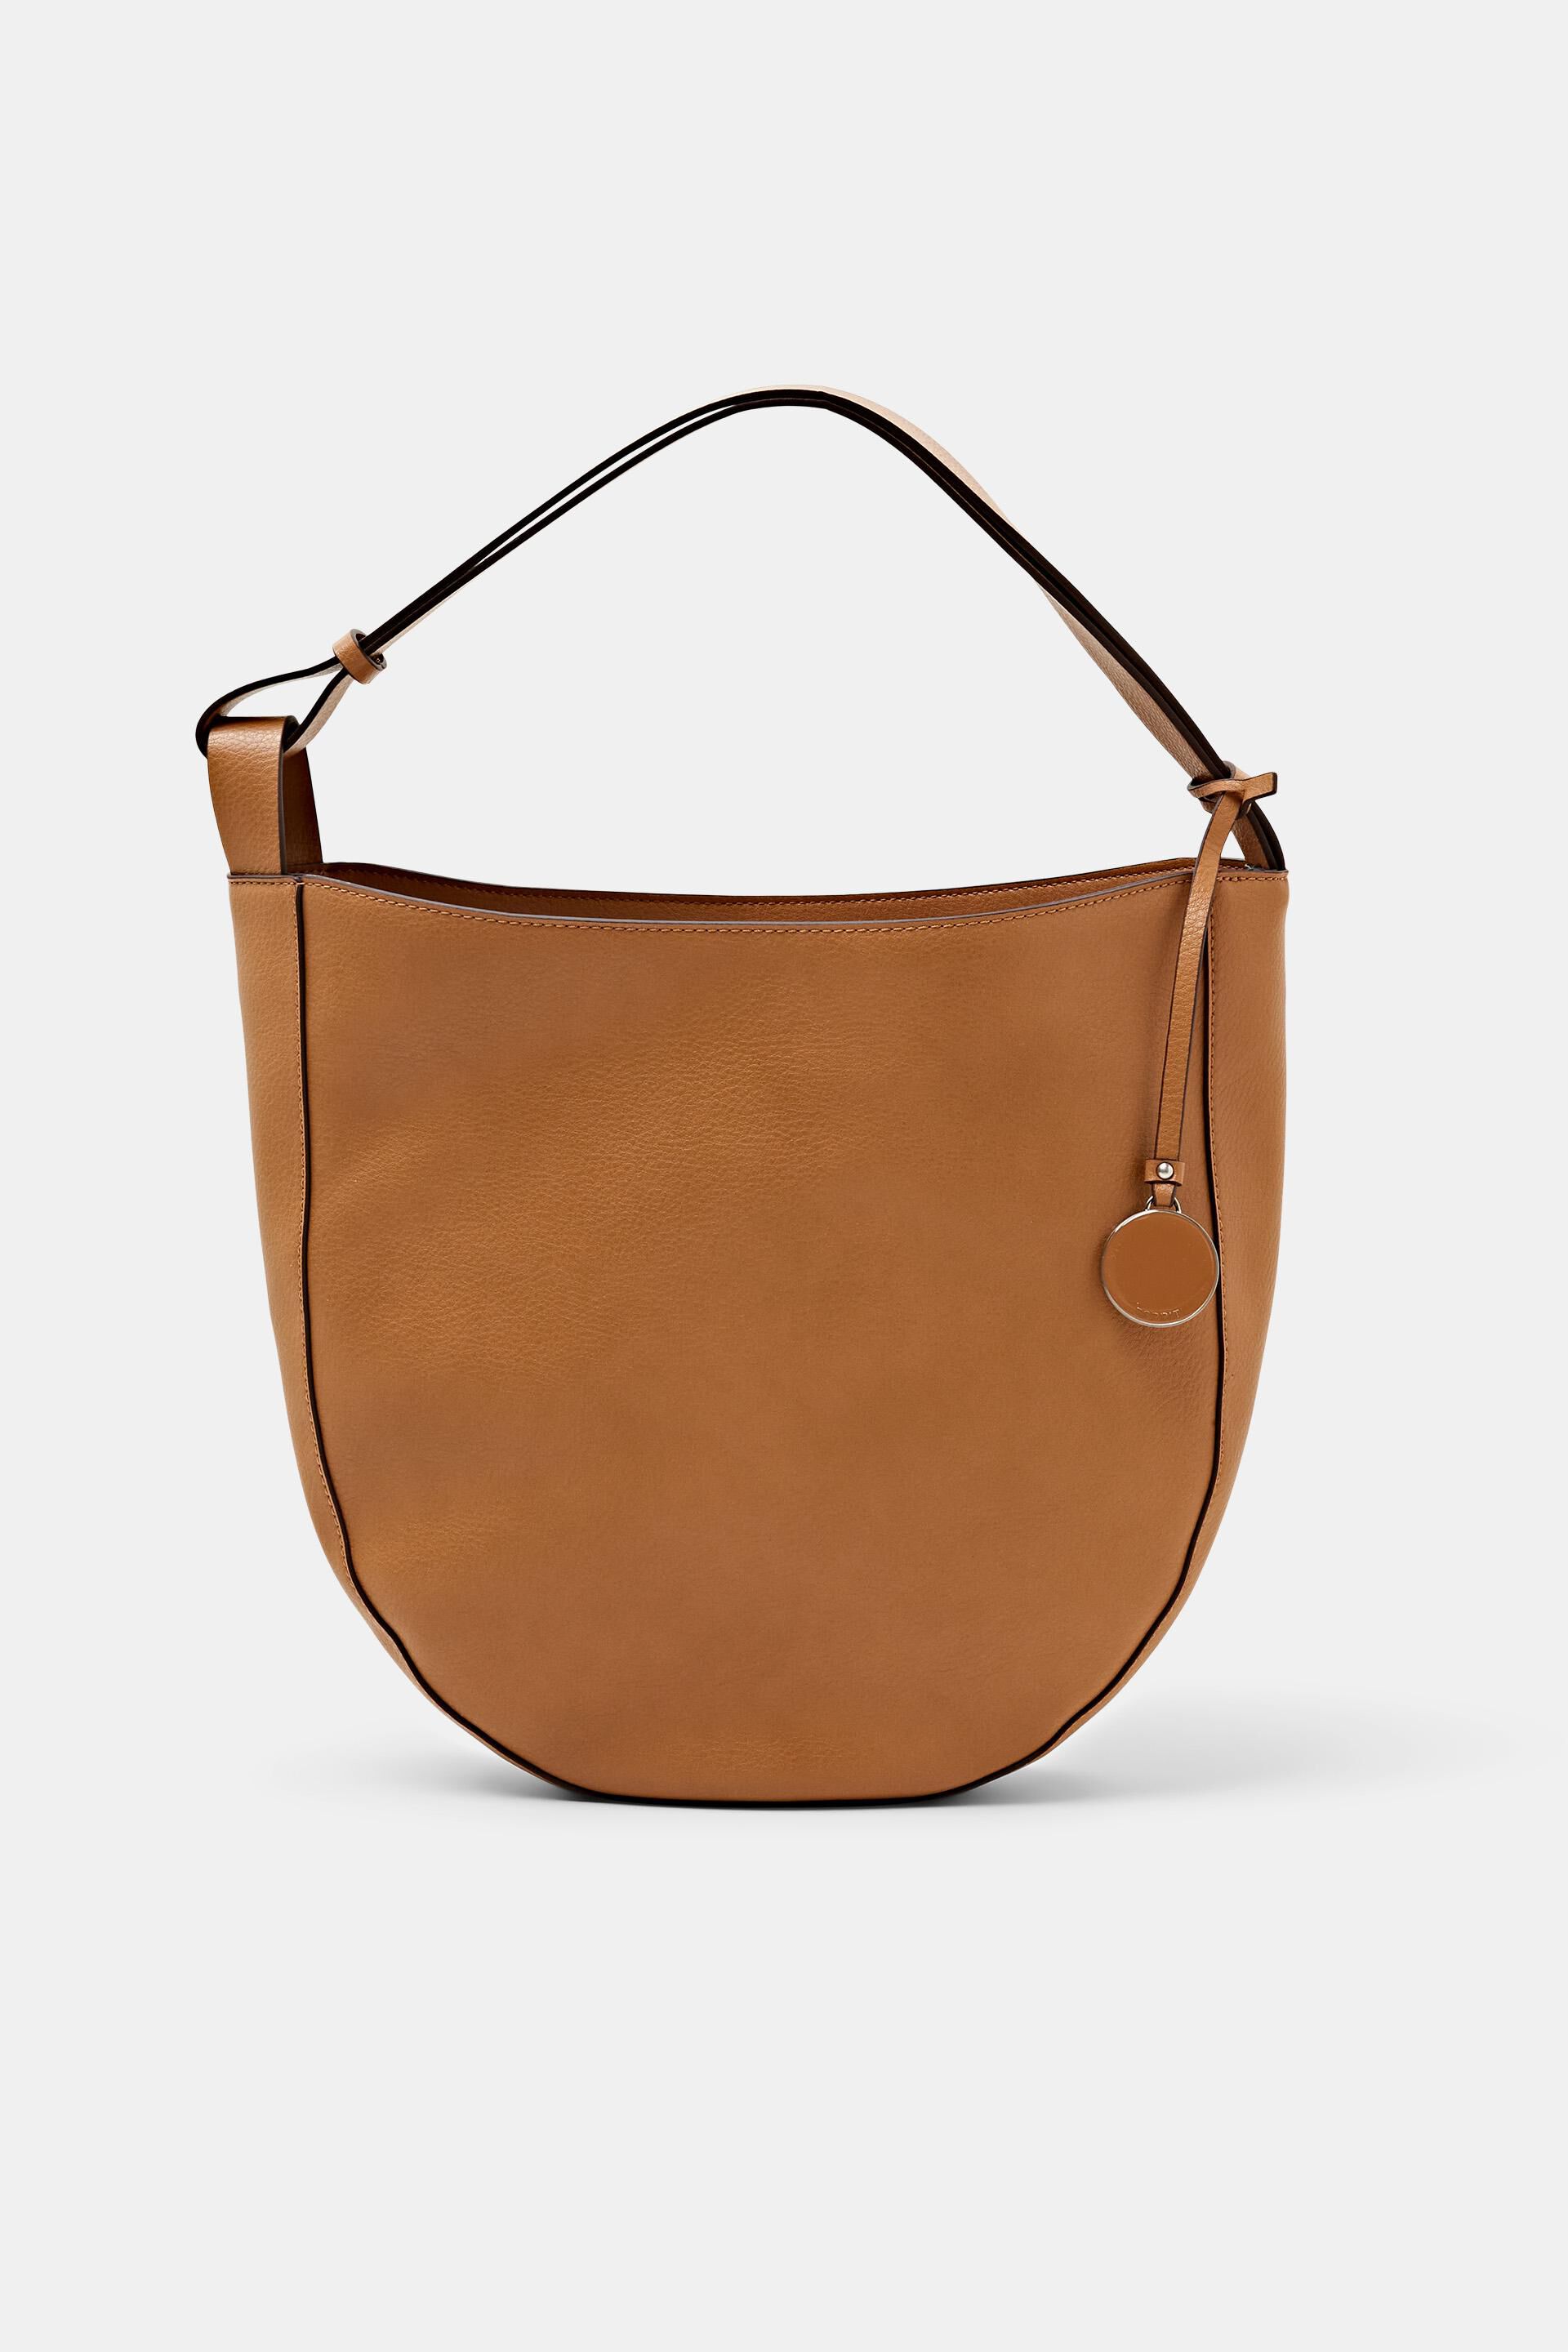 Esprit leather bag faux hobo Recycled: